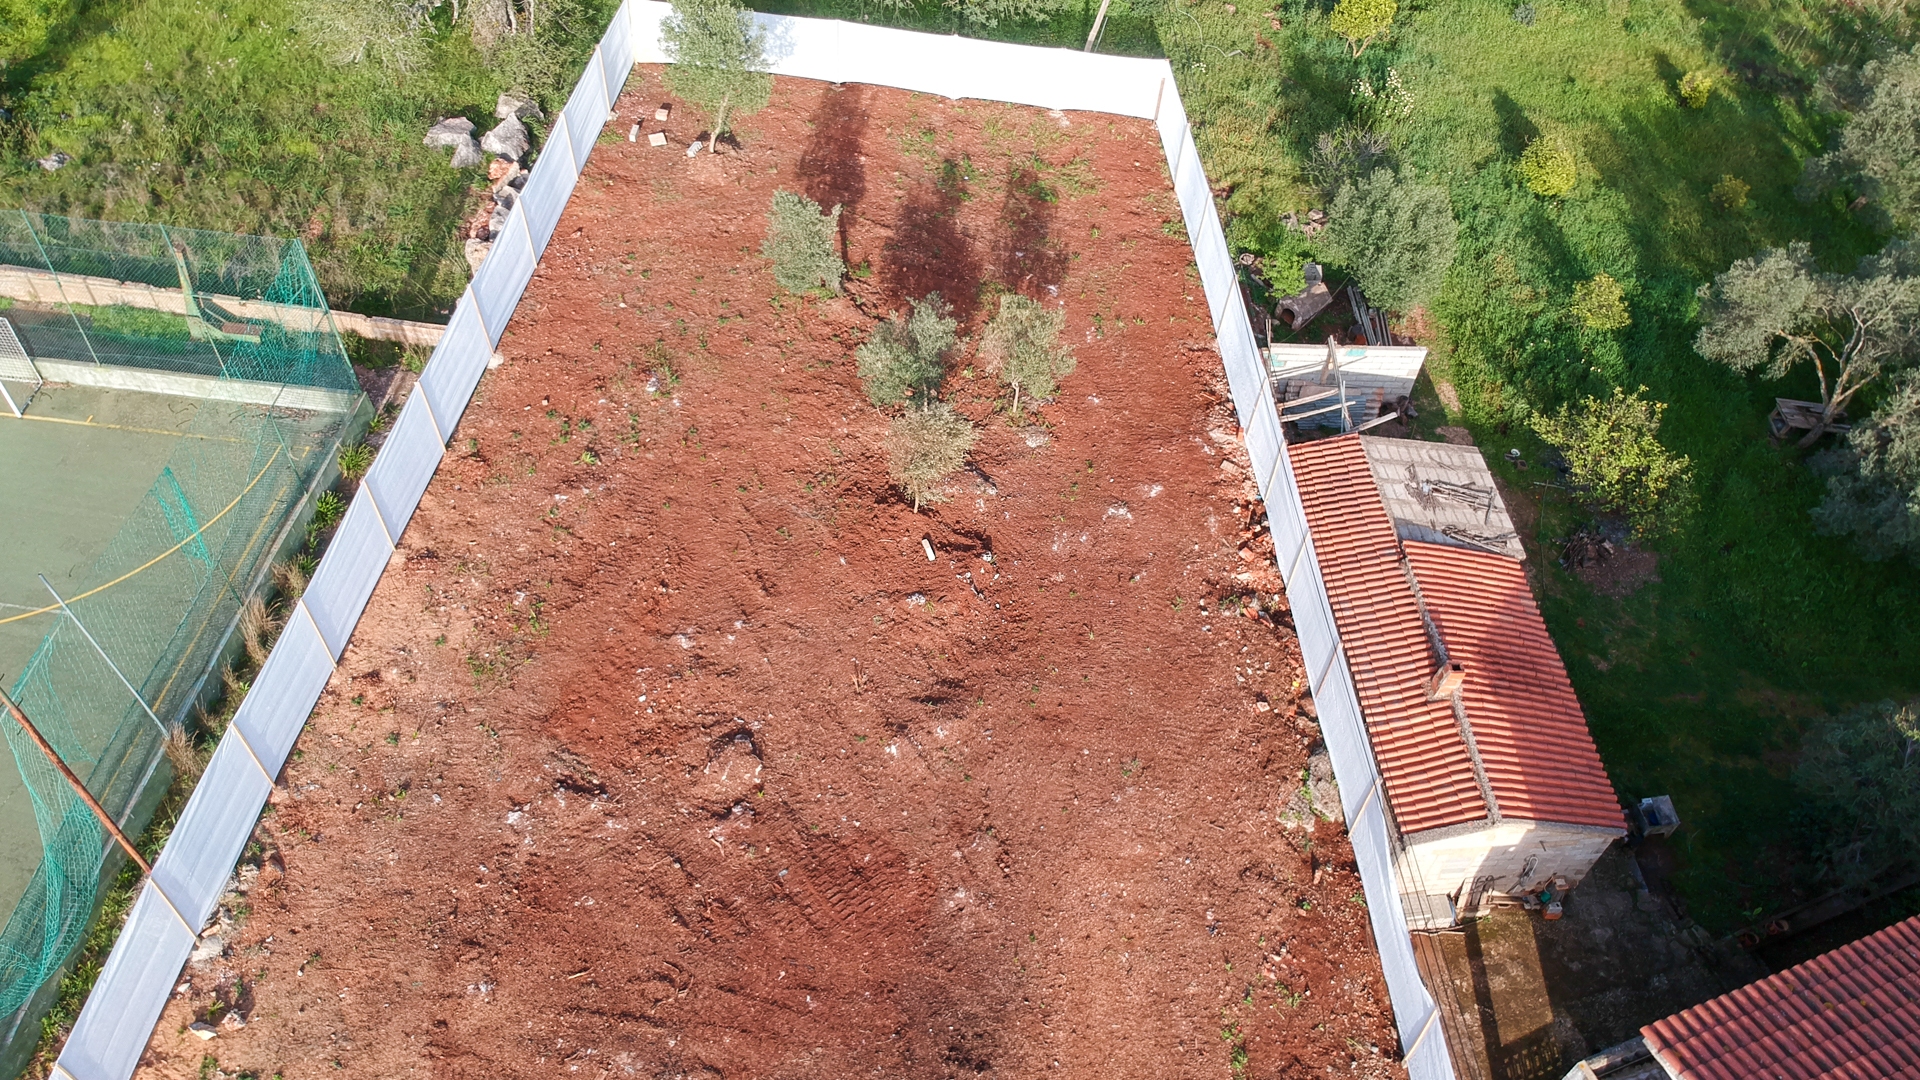 Large Plot with Approved Project For 3 Linked Villas in Benafim  | VM2093 Large Plot with approved project for 3 townhouses which can be built to 175m² each. Located close to town and all amenities